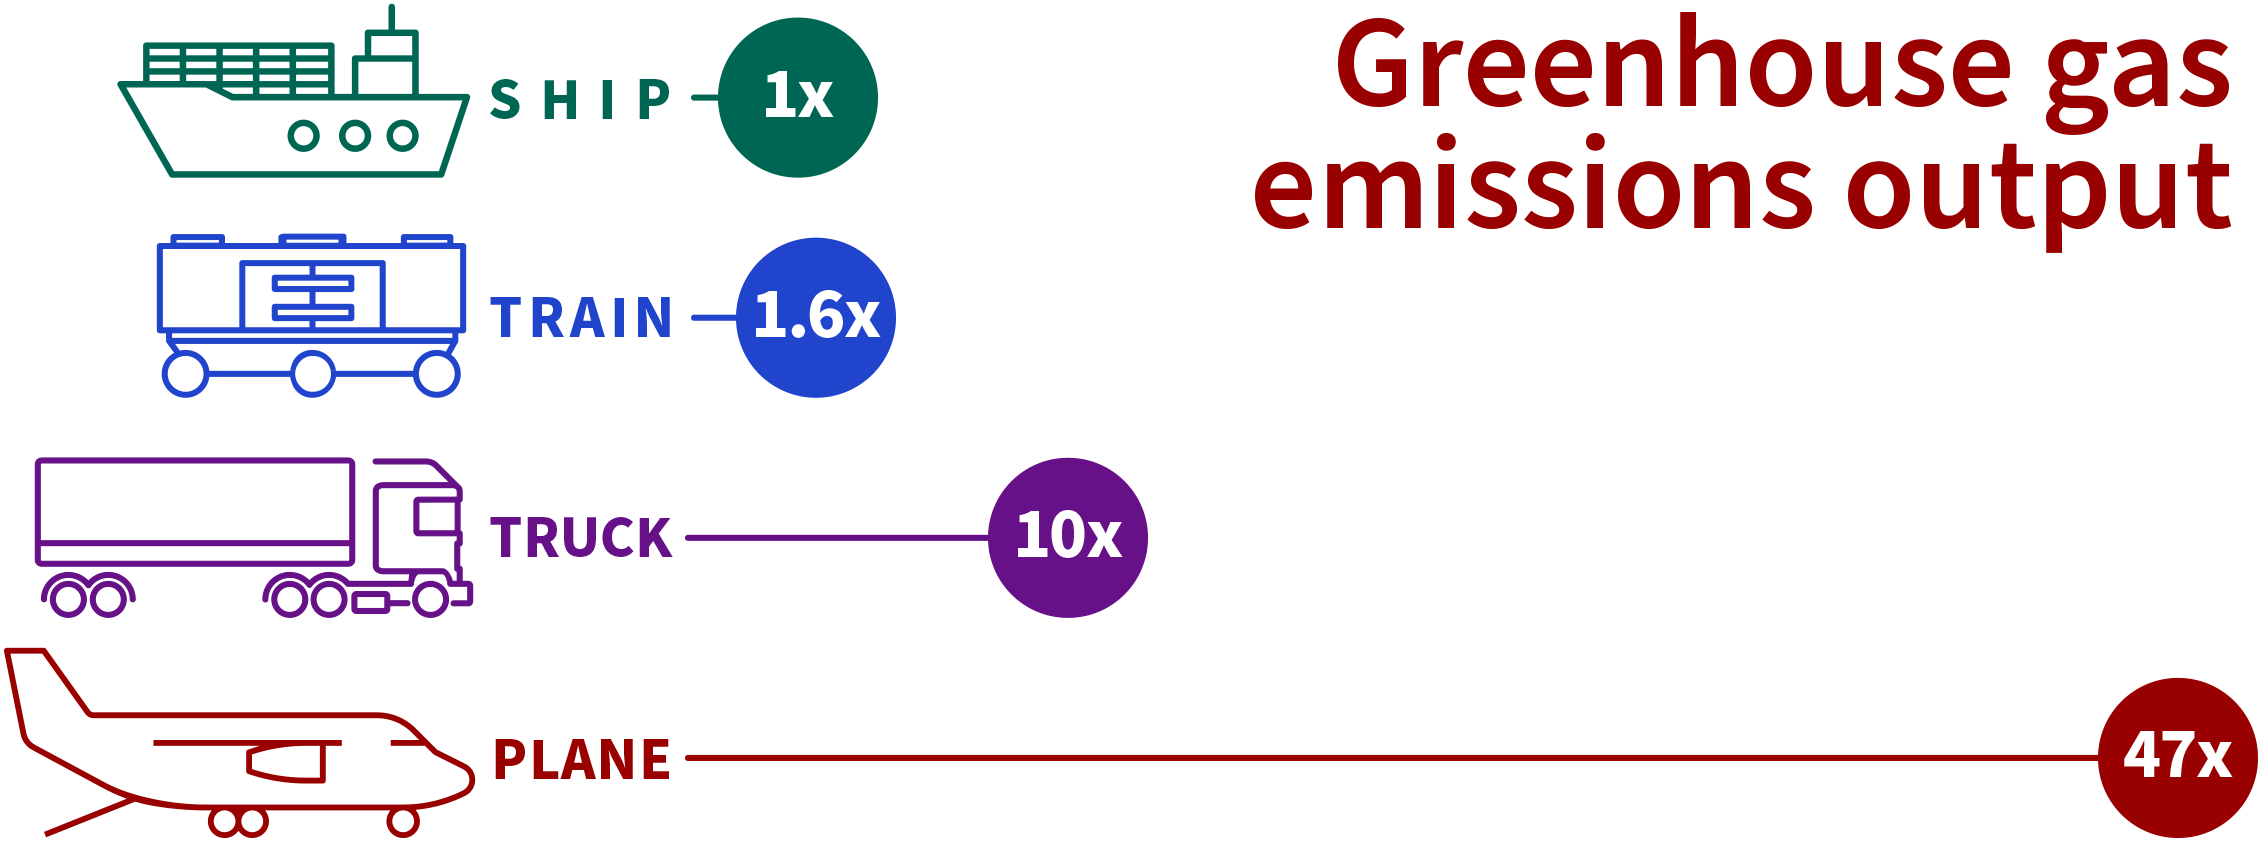 Chart showing comparison of greenhouse gas emissions between four modes of transport